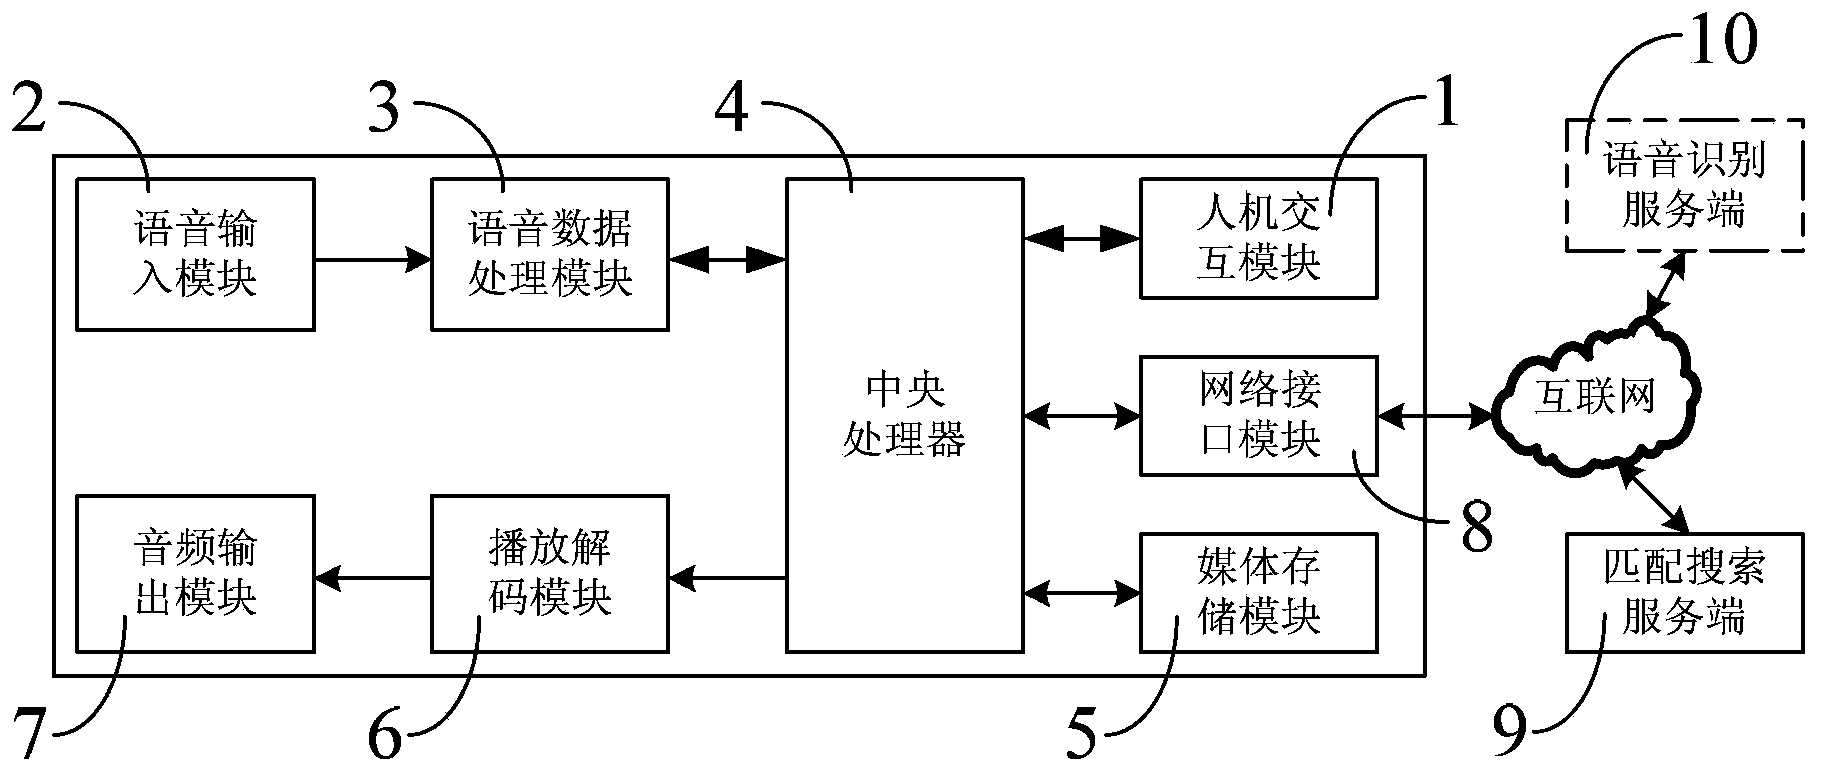 Multimedia playing method and device with function of voice controlling and humming searching